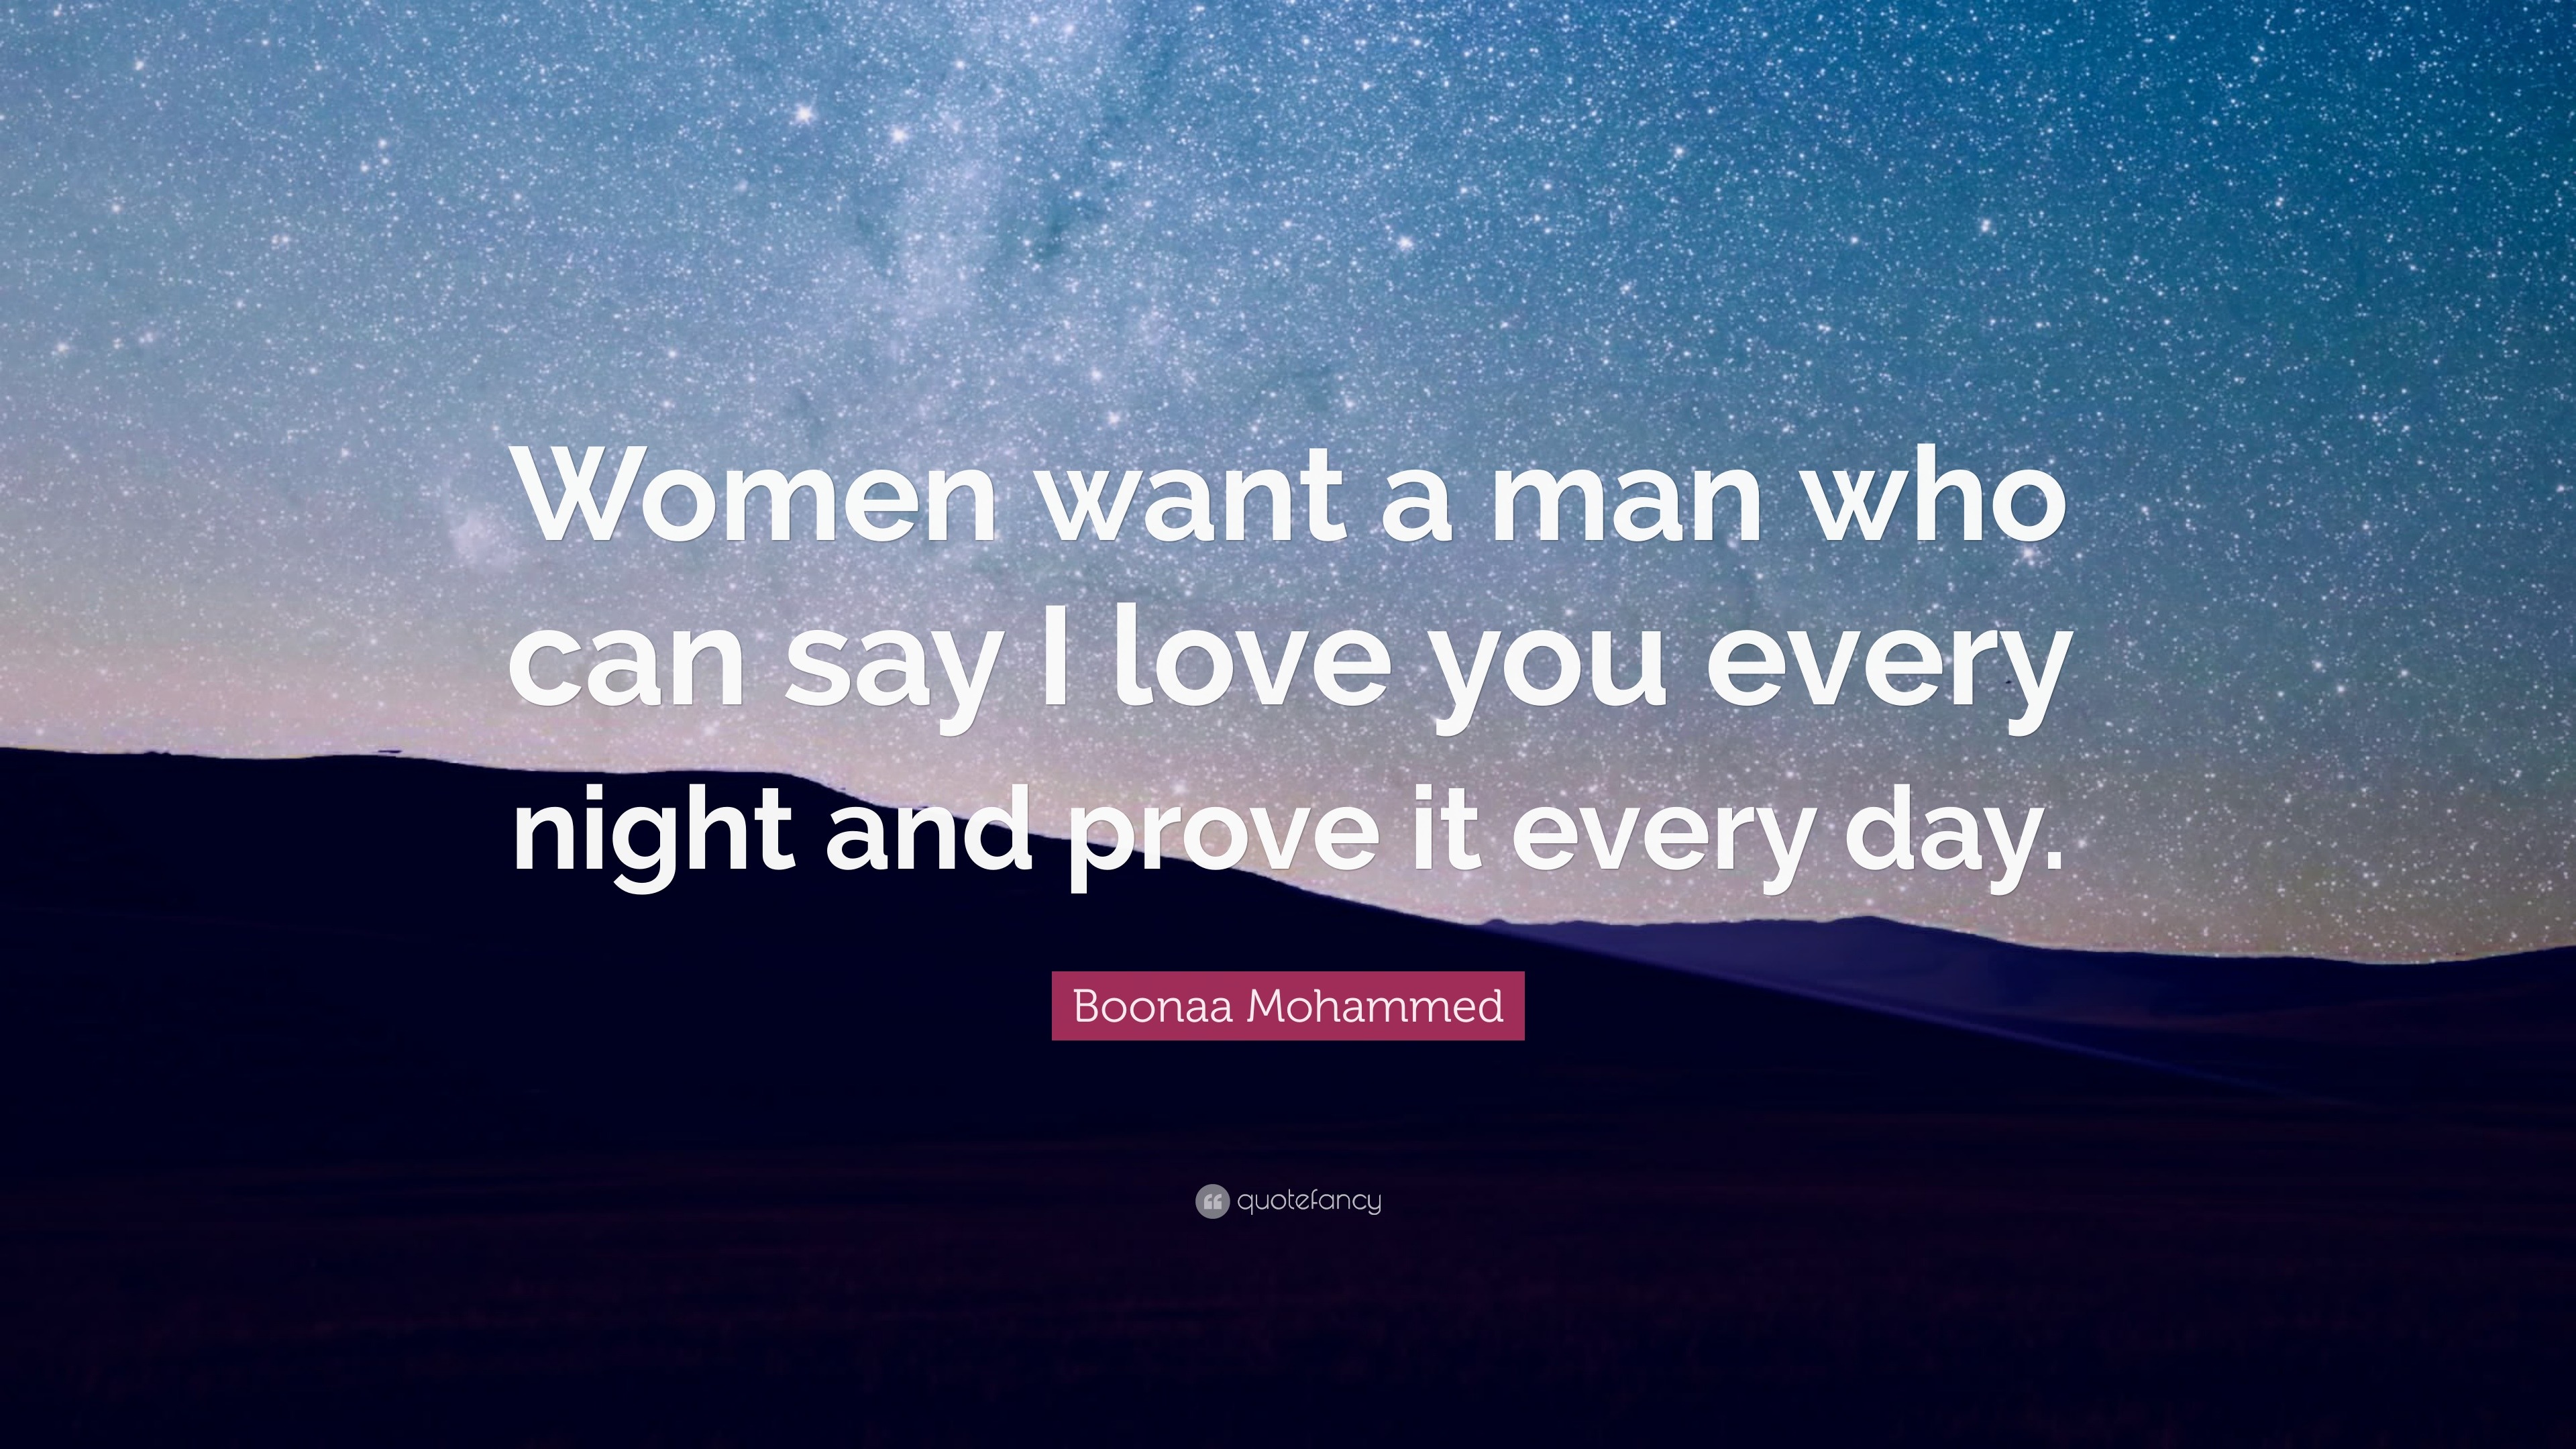 Boonaa Mohammed Quote “Women want a man who can say I love you every